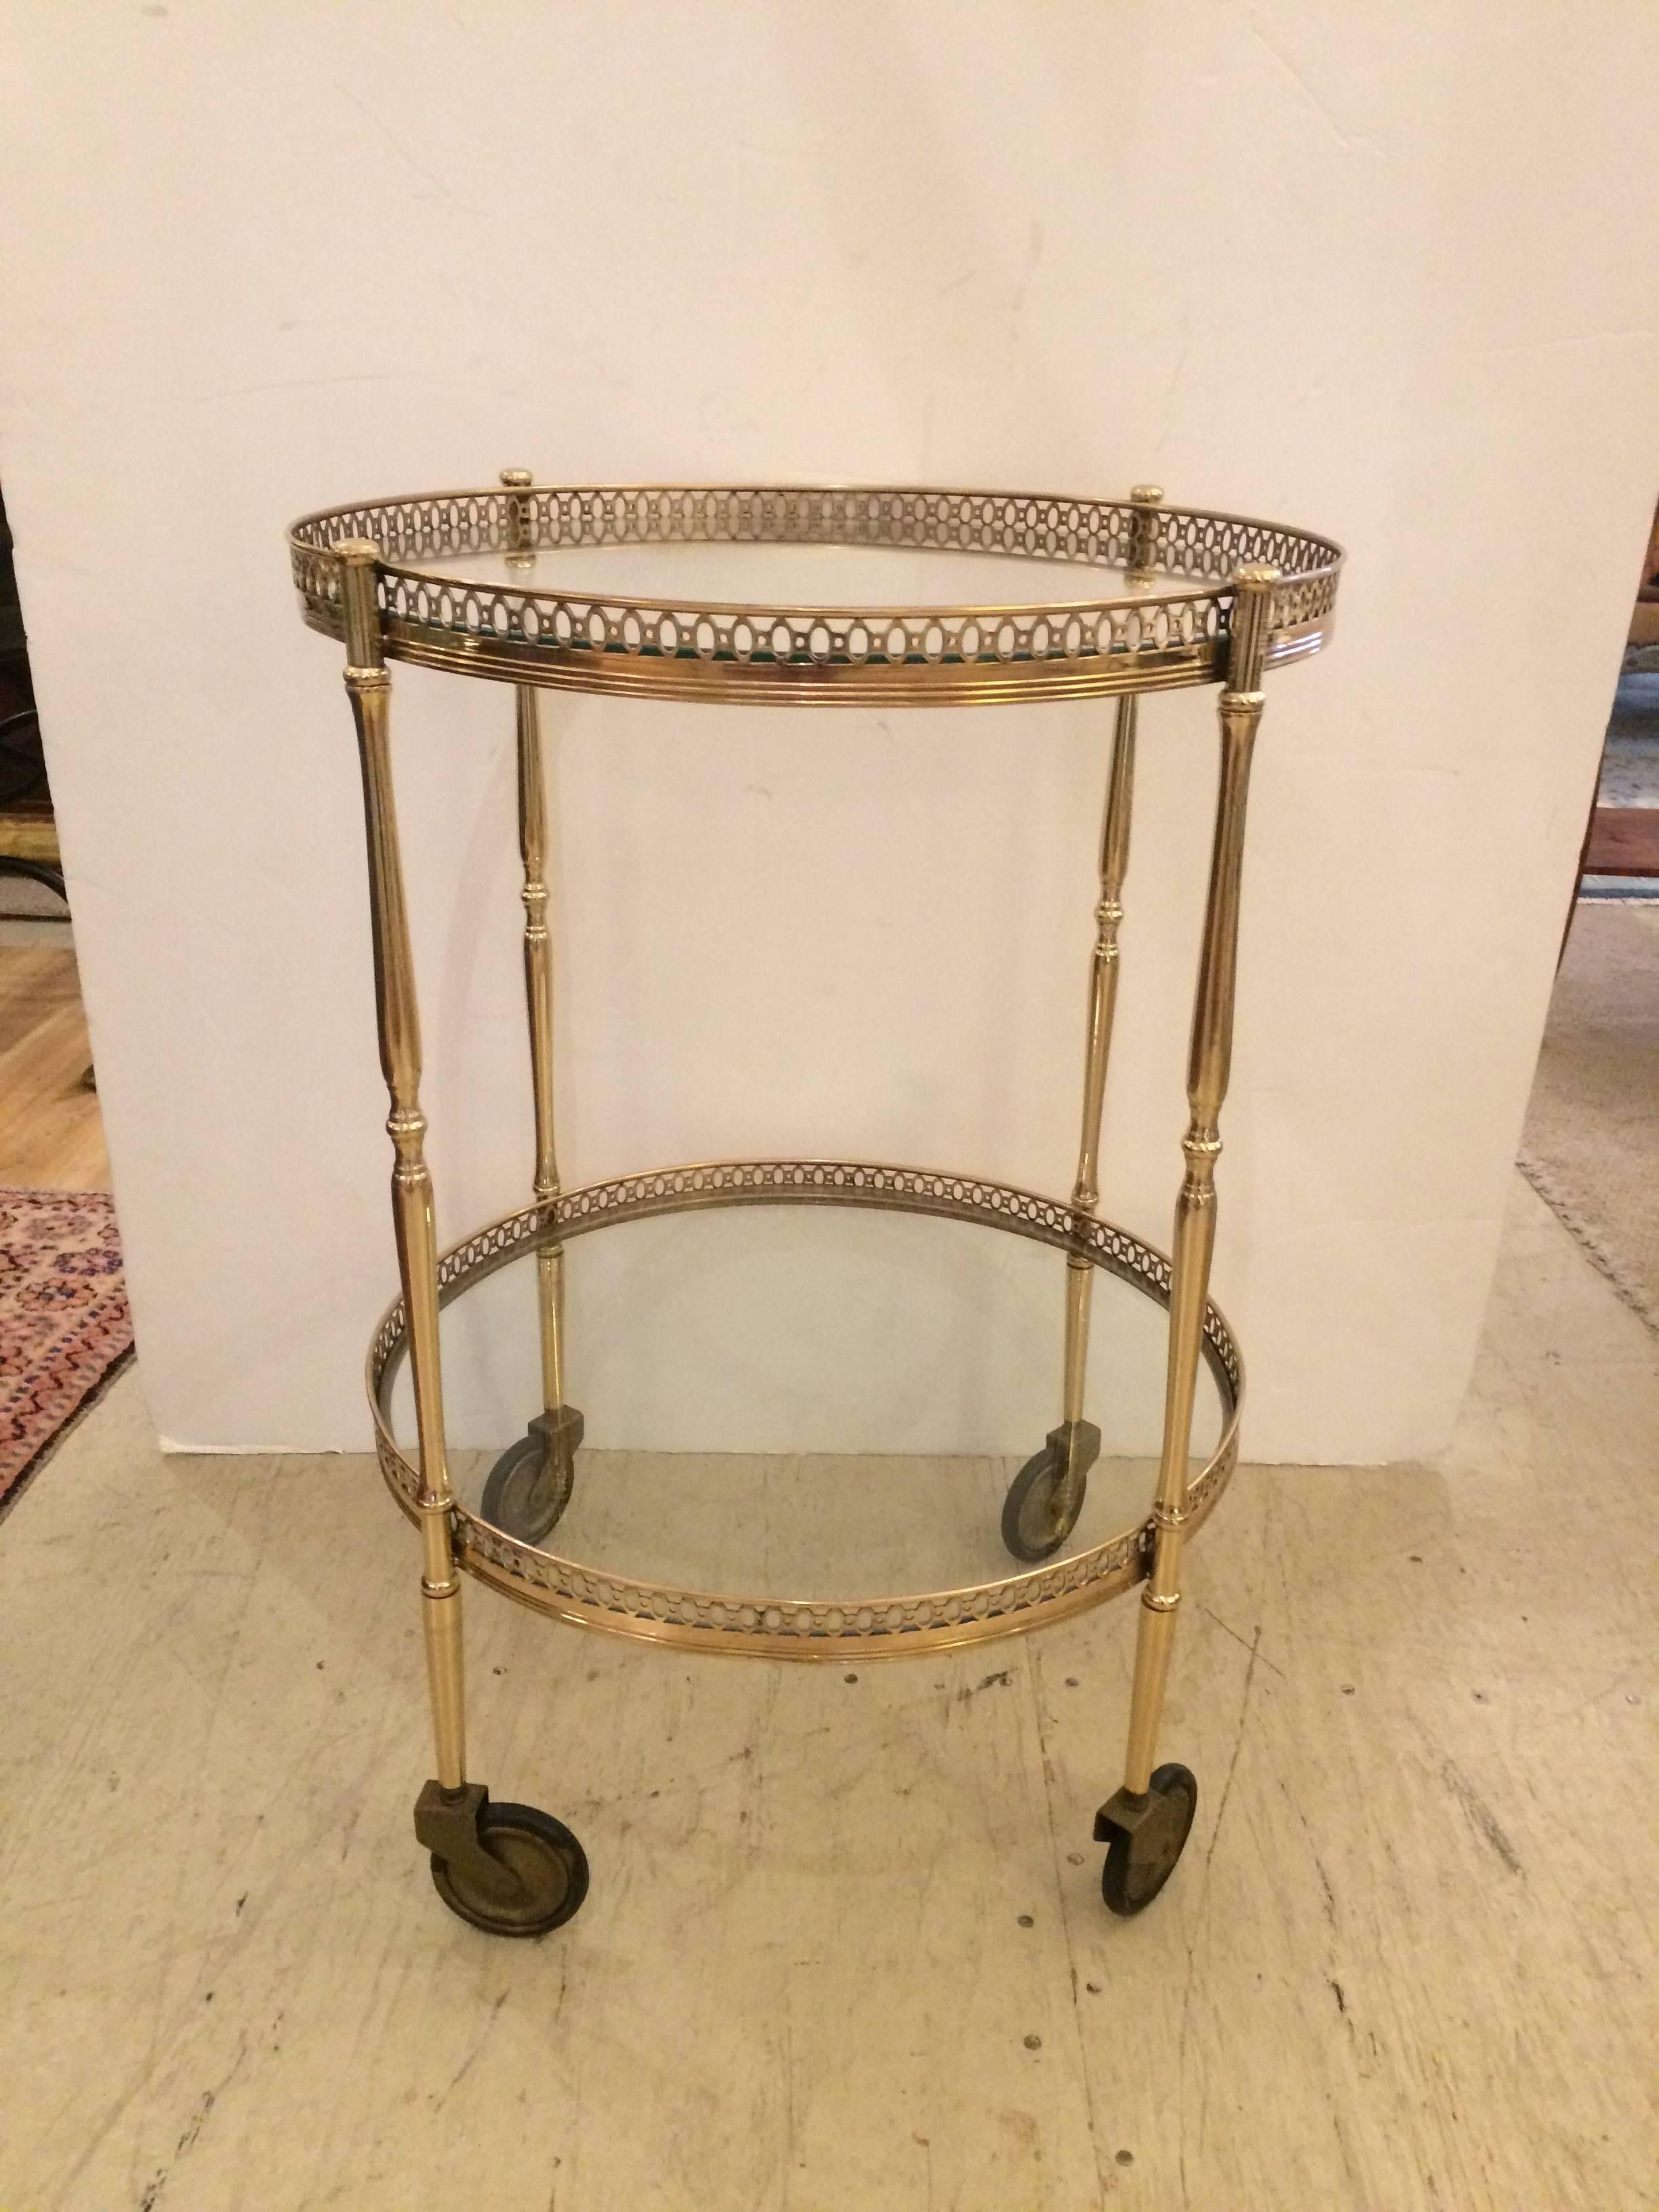 Elegant round bar cart having two circular tiers with gorgeous brass galleries, professionally polished and on casters. Bottom tier is 10